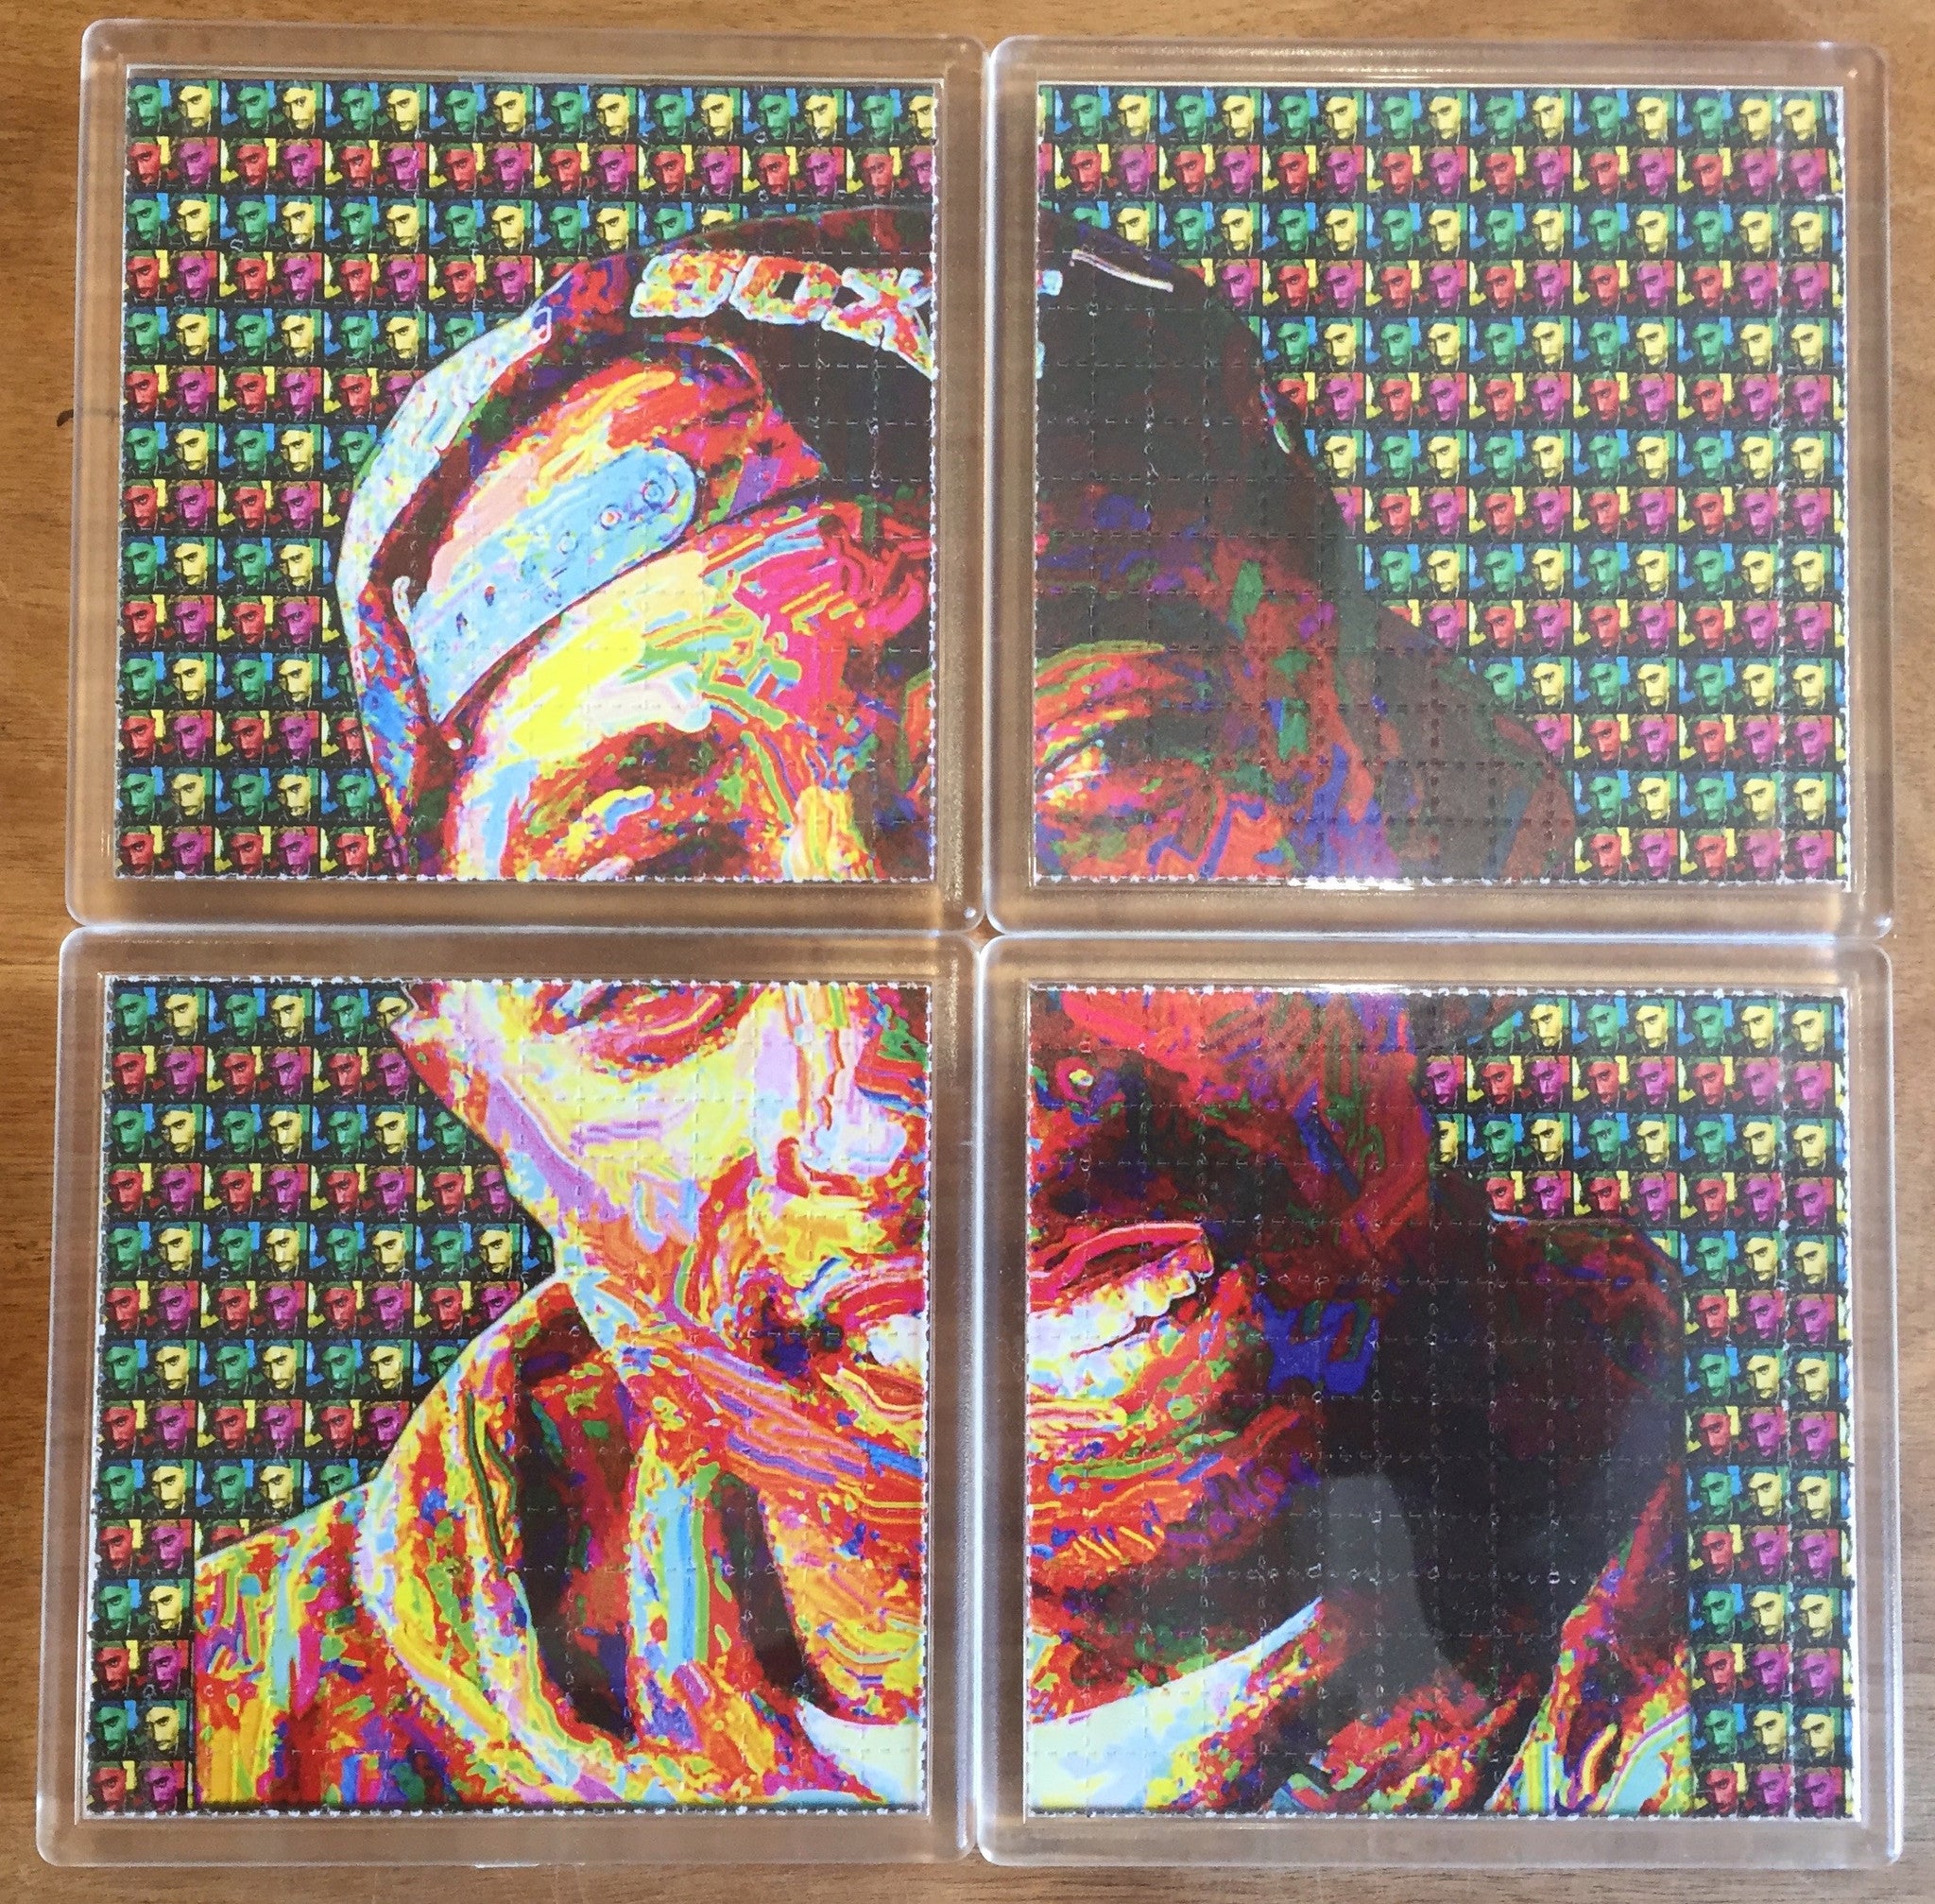 Tupac Shakur / 2Pac - Psychedelic - Blotter Art - Highly Collectible Artwork Blotter Paper Coaster (4 pack)